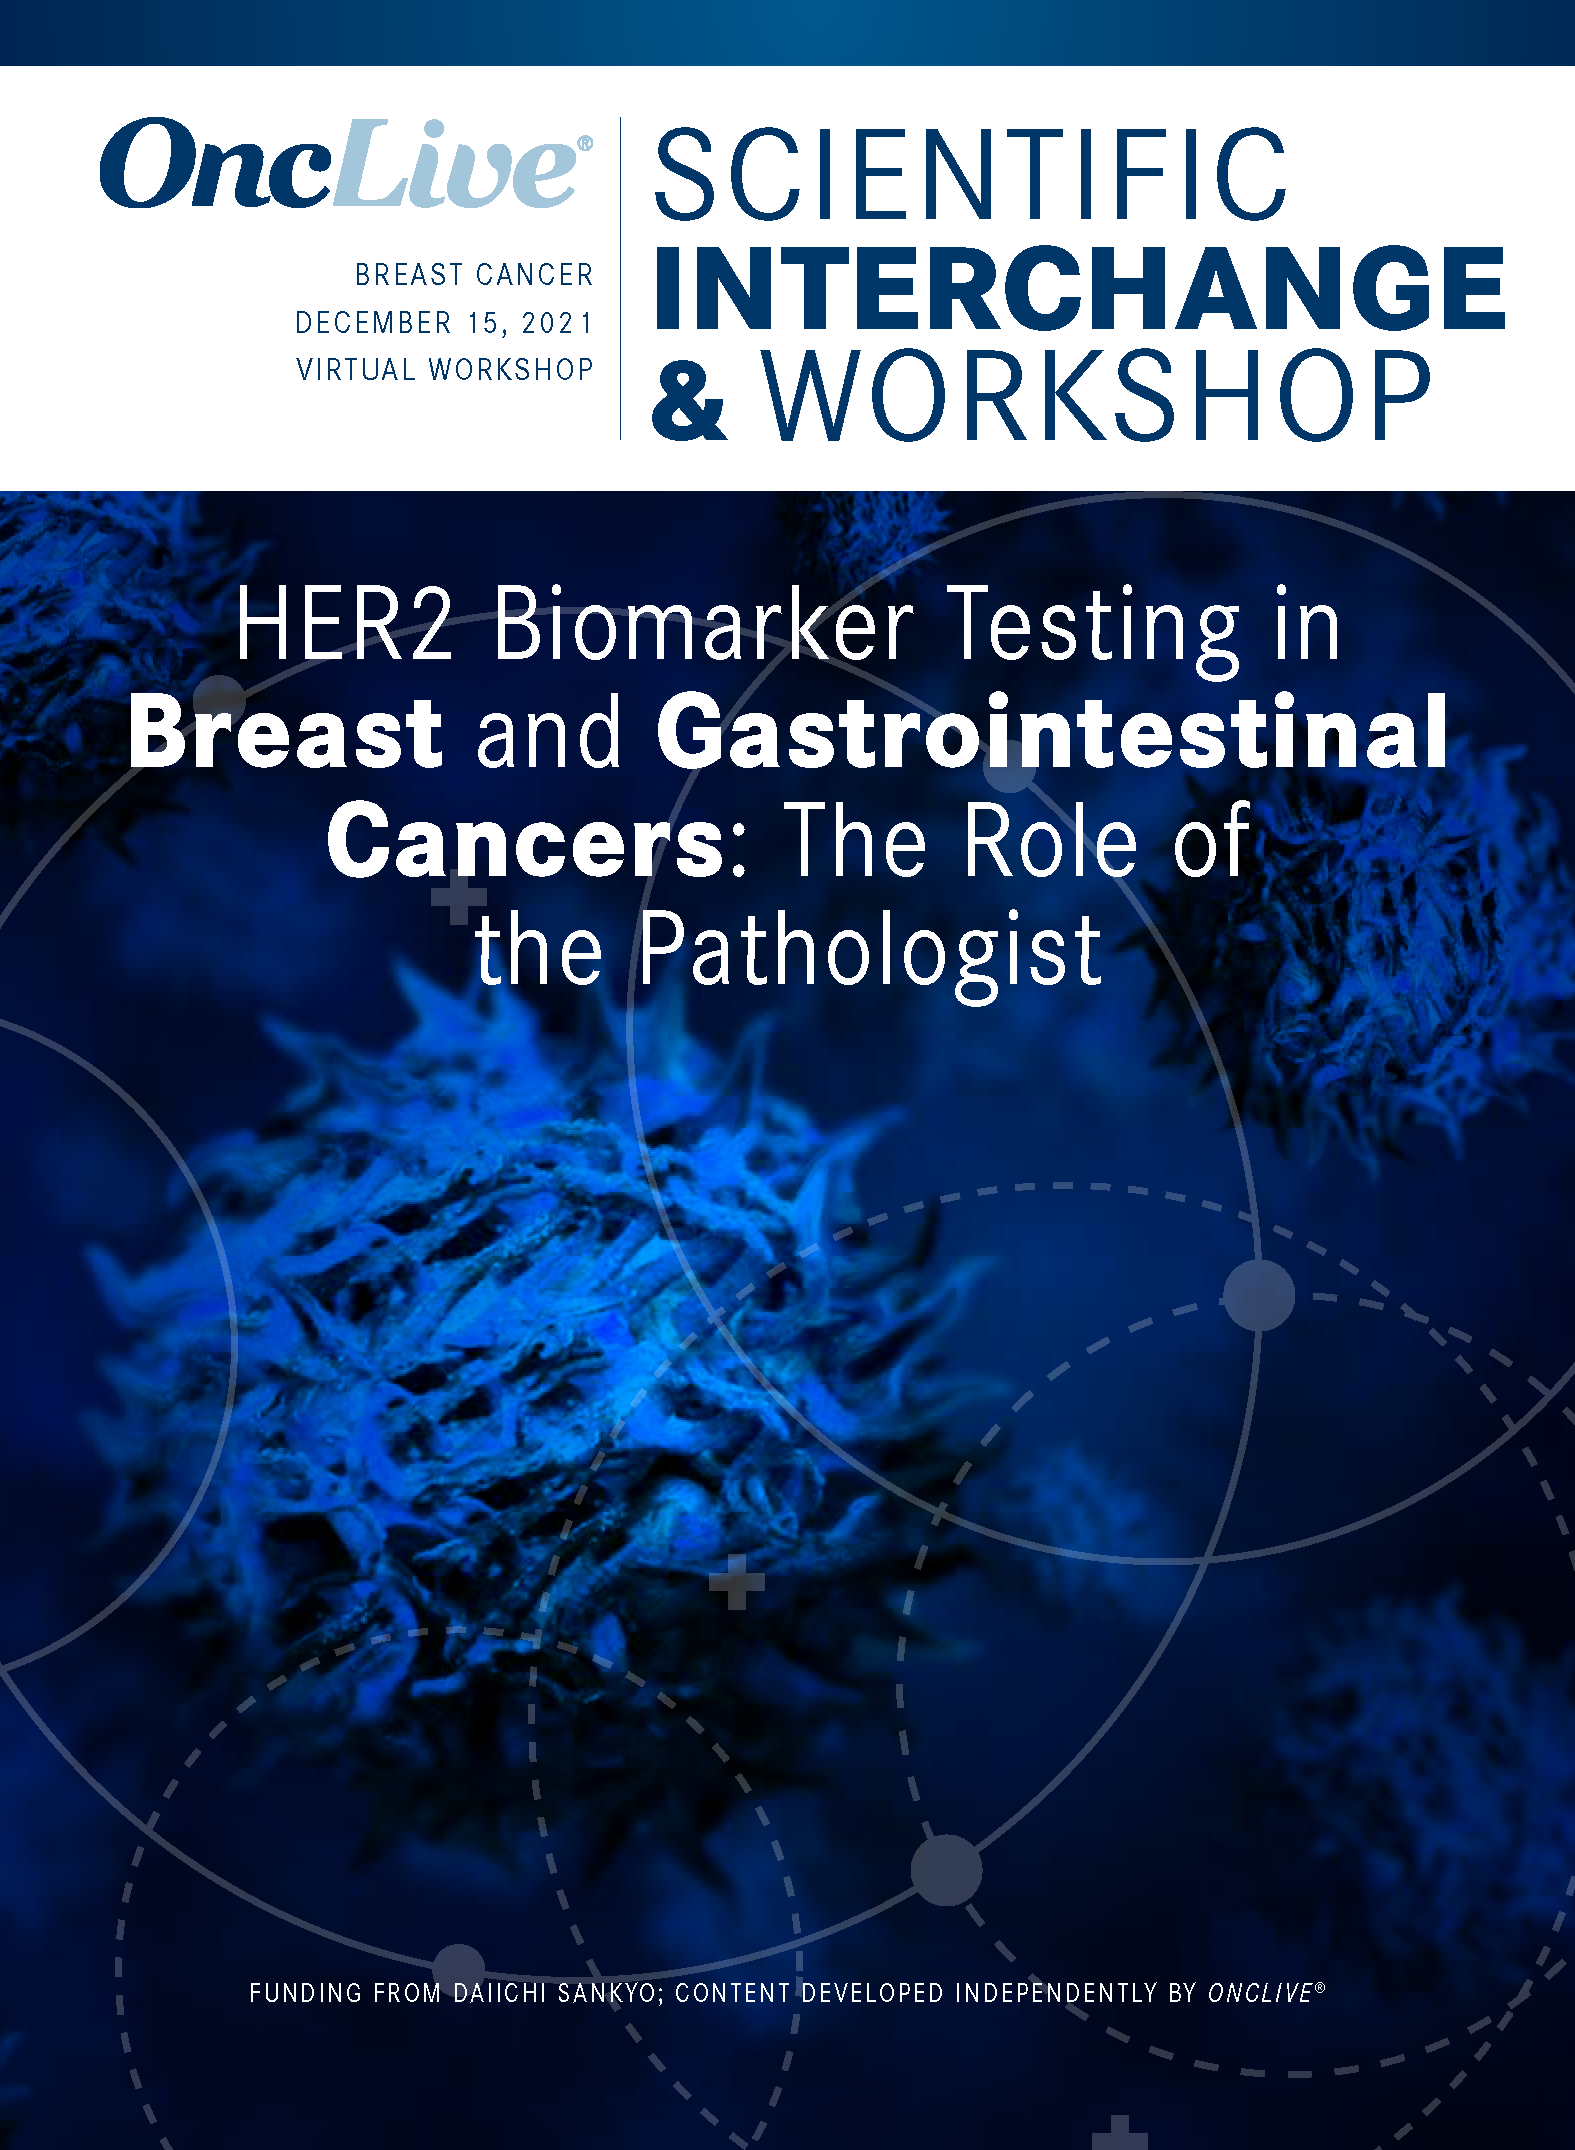 HER2 Biomarker Testing in Breast and Gastrointestinal Cancers: The Role of the Pathologist